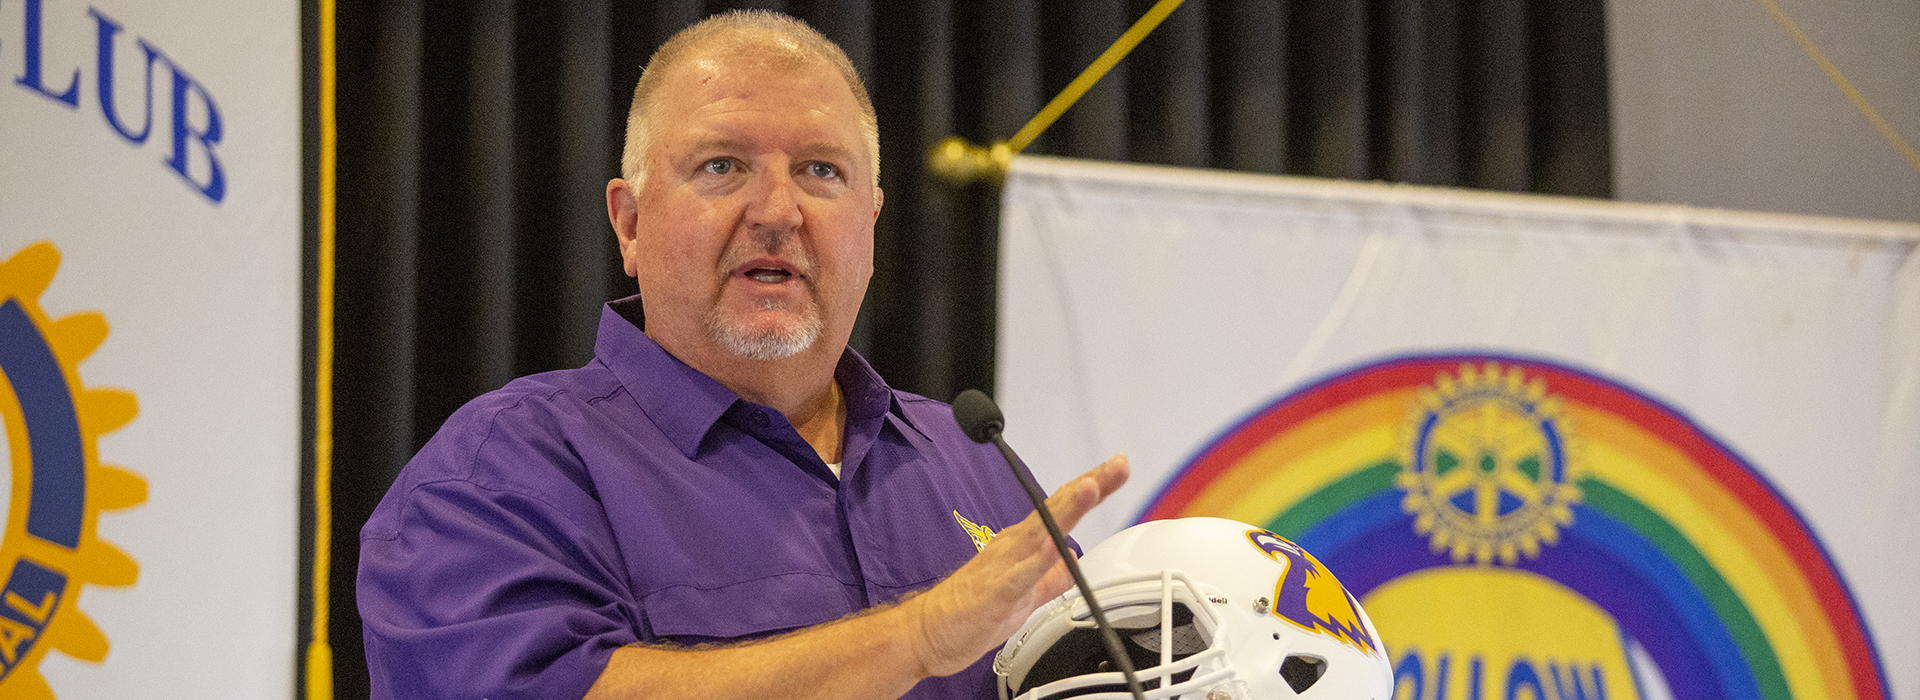 Alexander ready to start next 100 years of Tech football, speaks at Rotary event